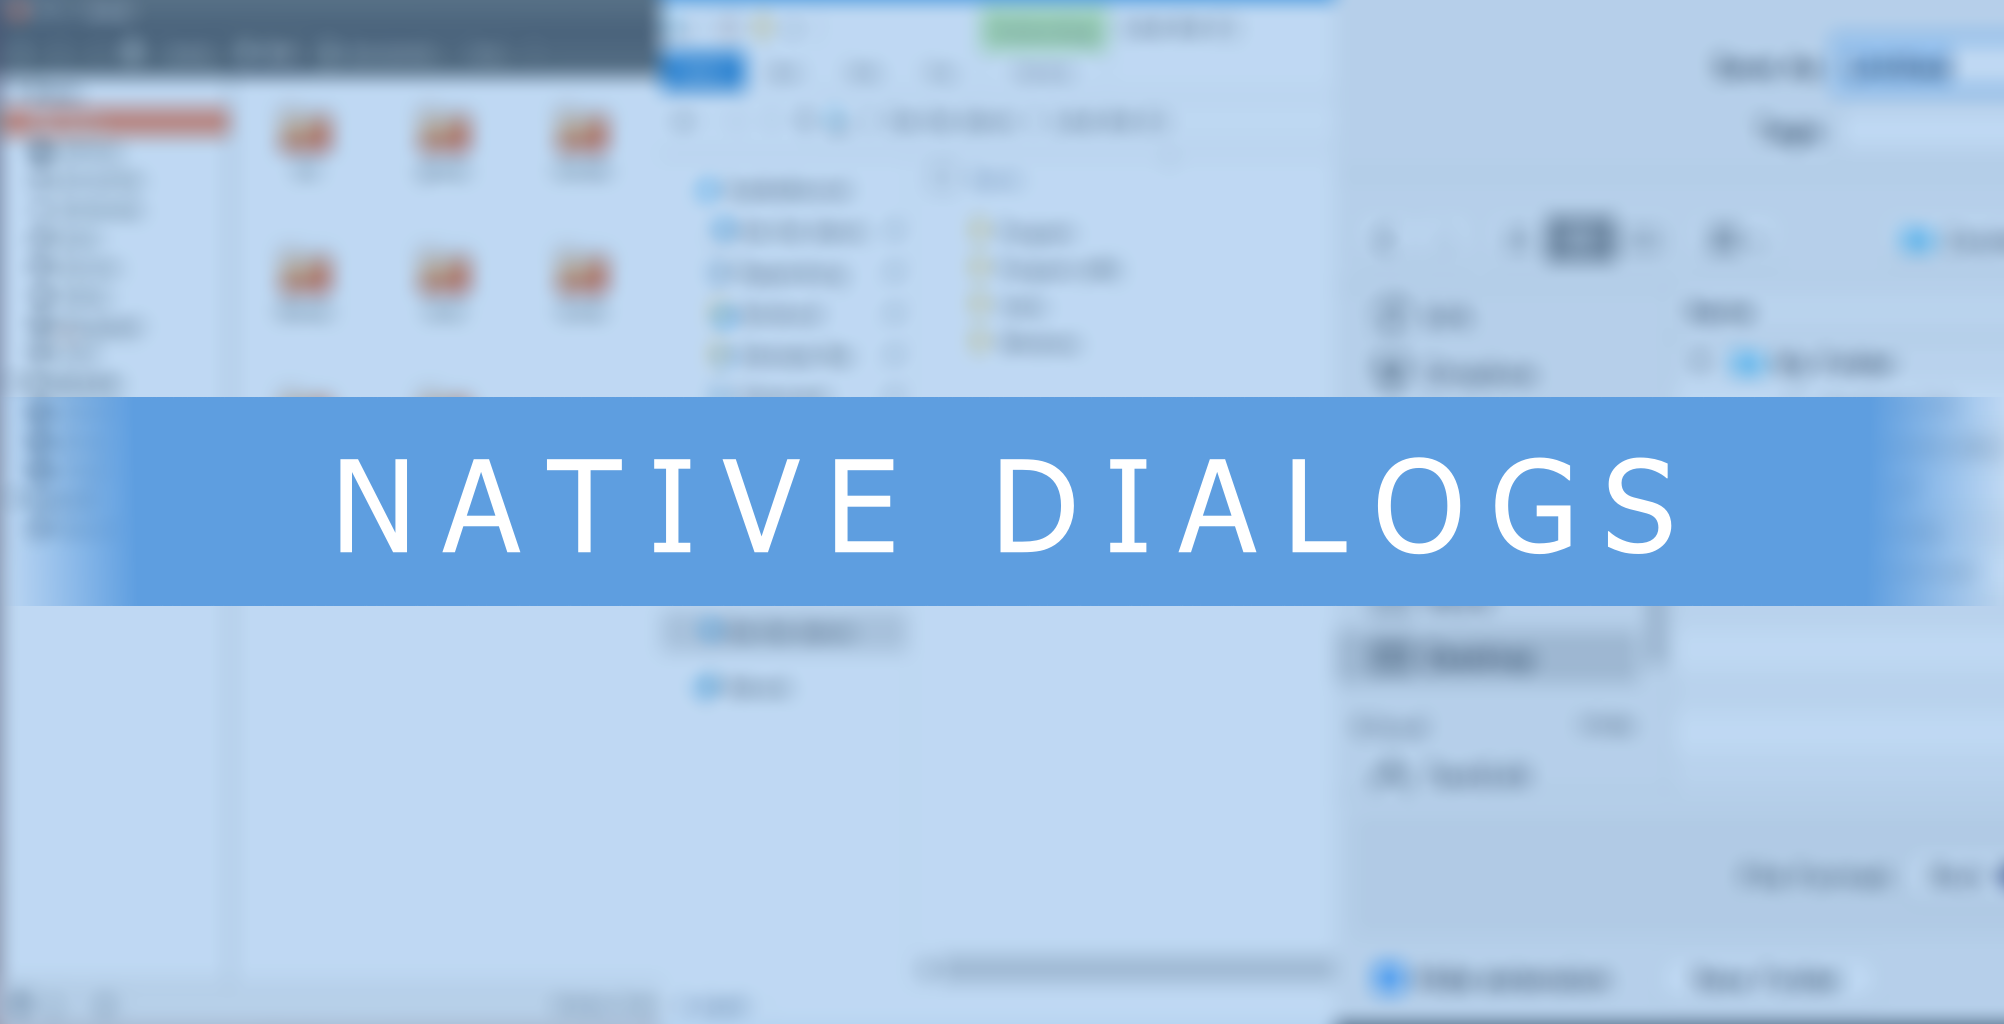 native_dialogs_banner.png